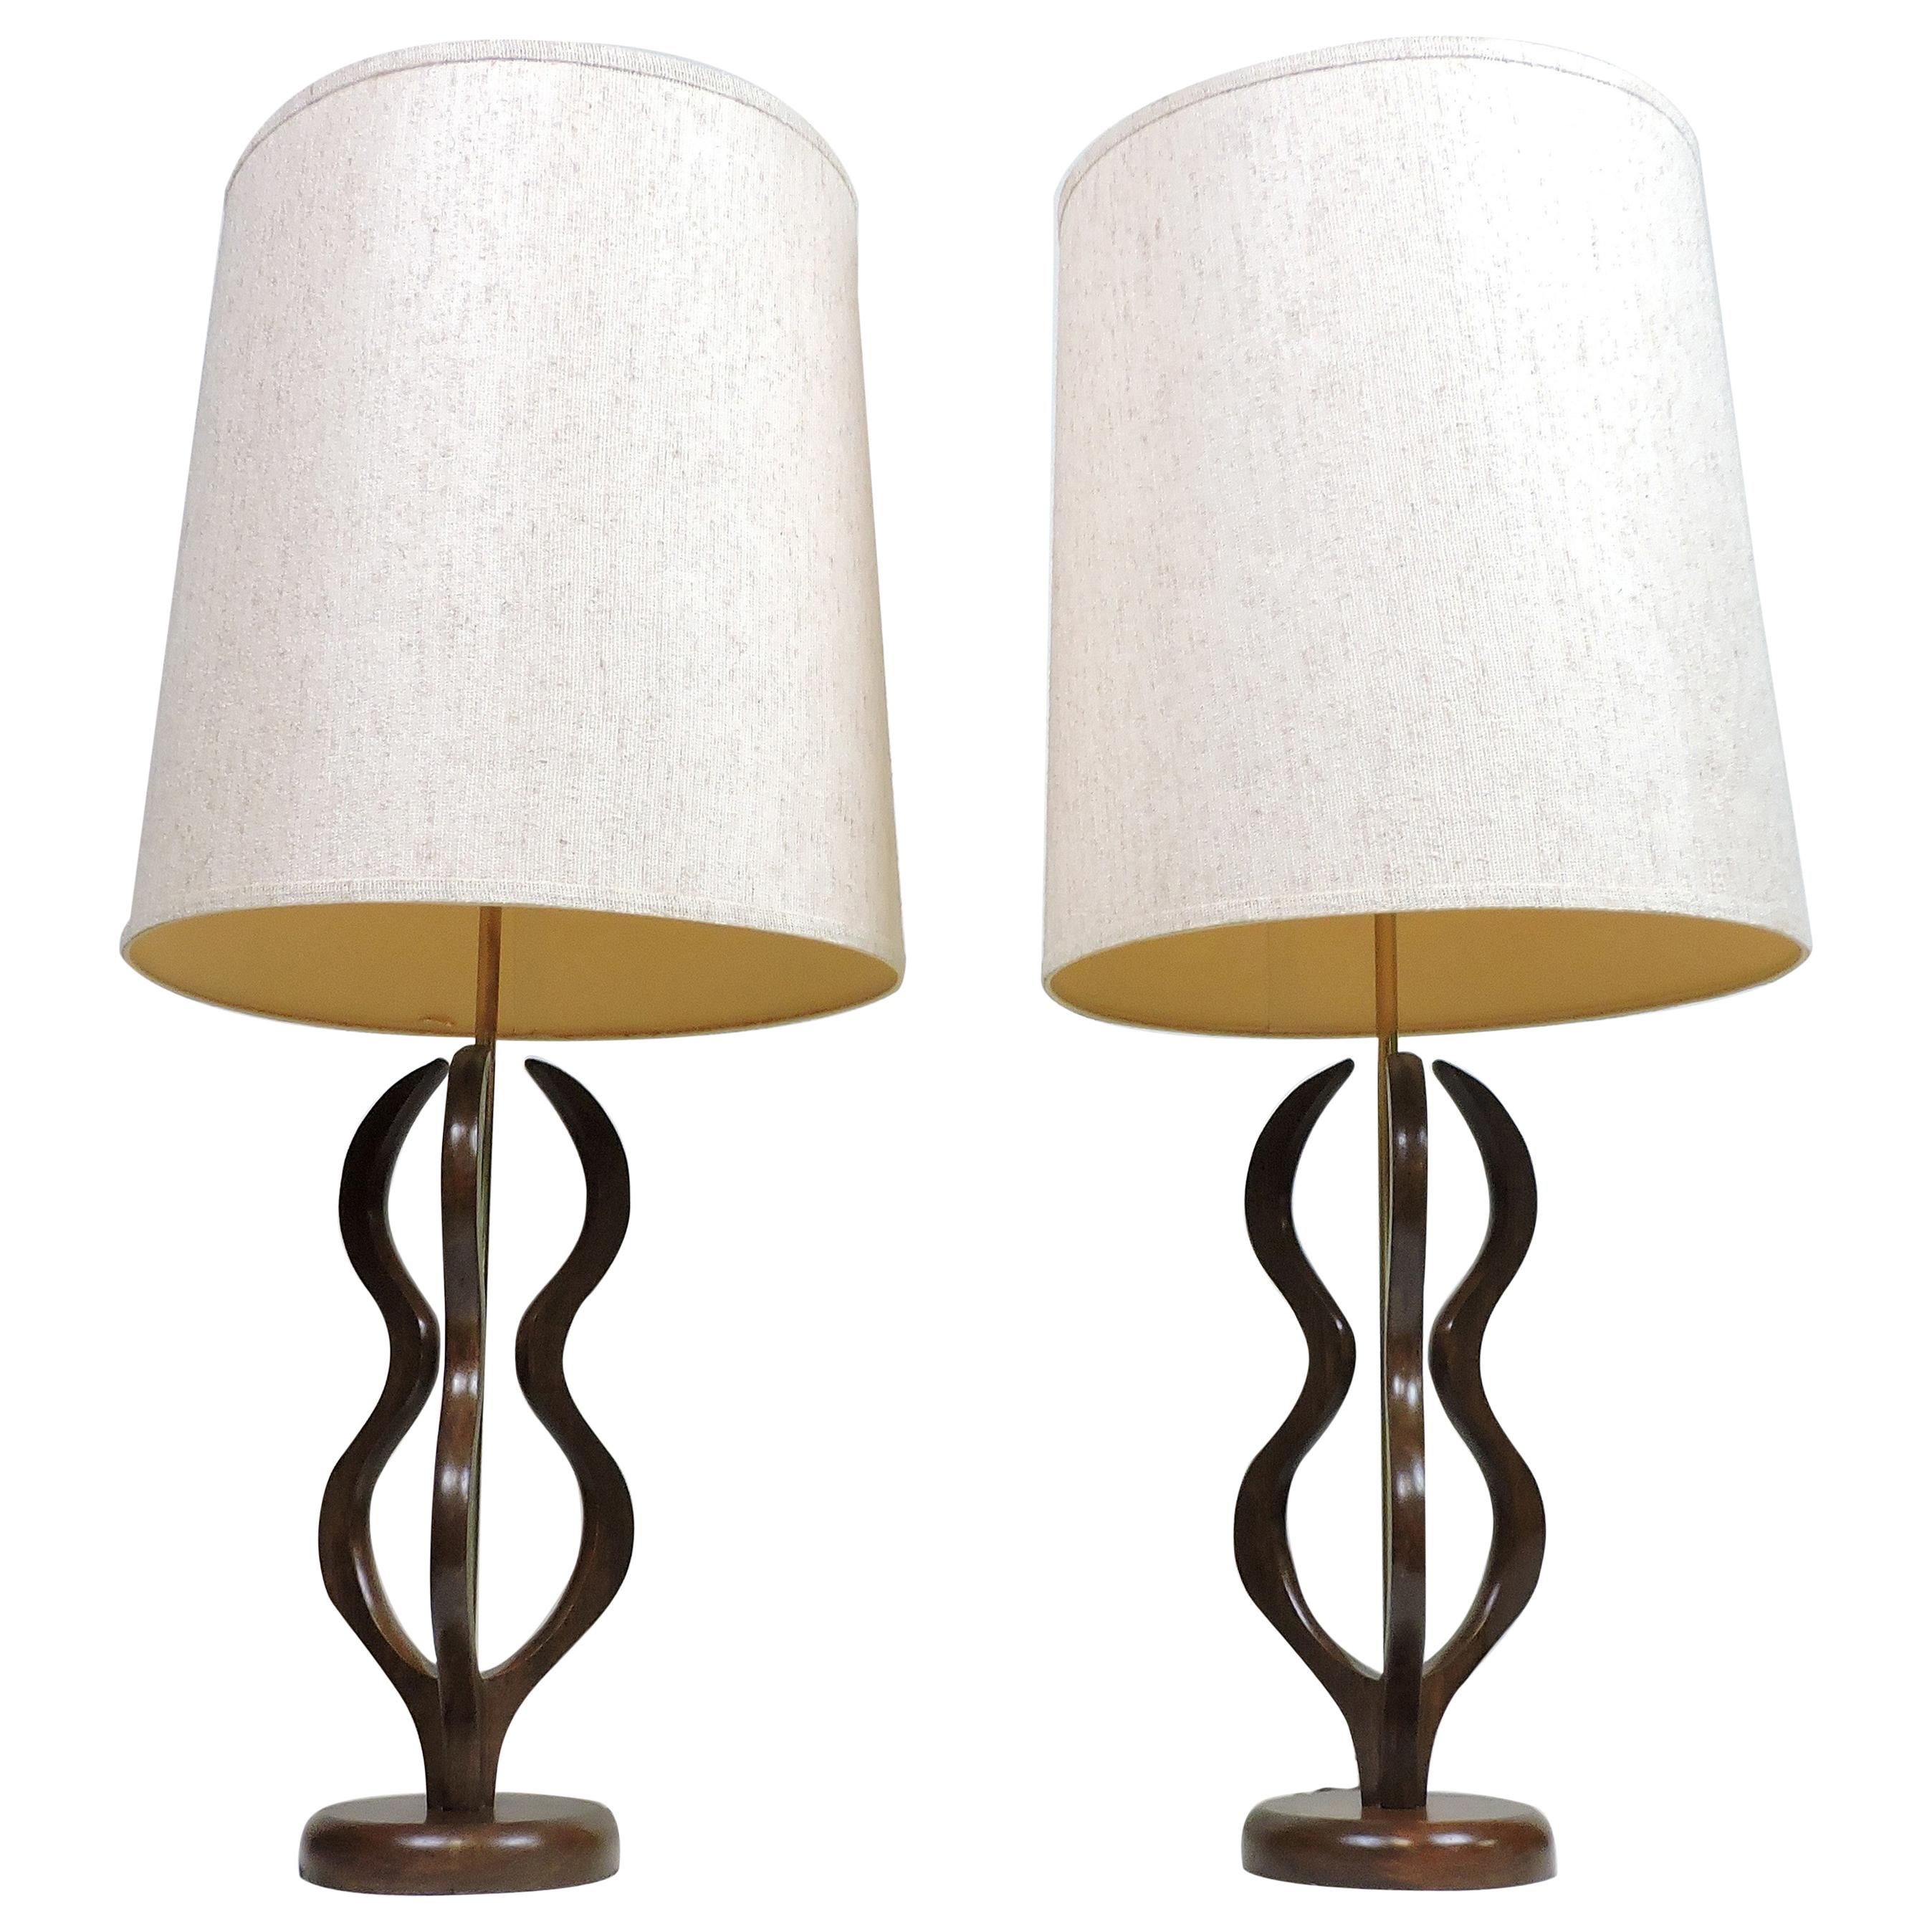 Pair of Pearsall or Modeline Style Sculpted Walnut Mid-Century Modern Lamps